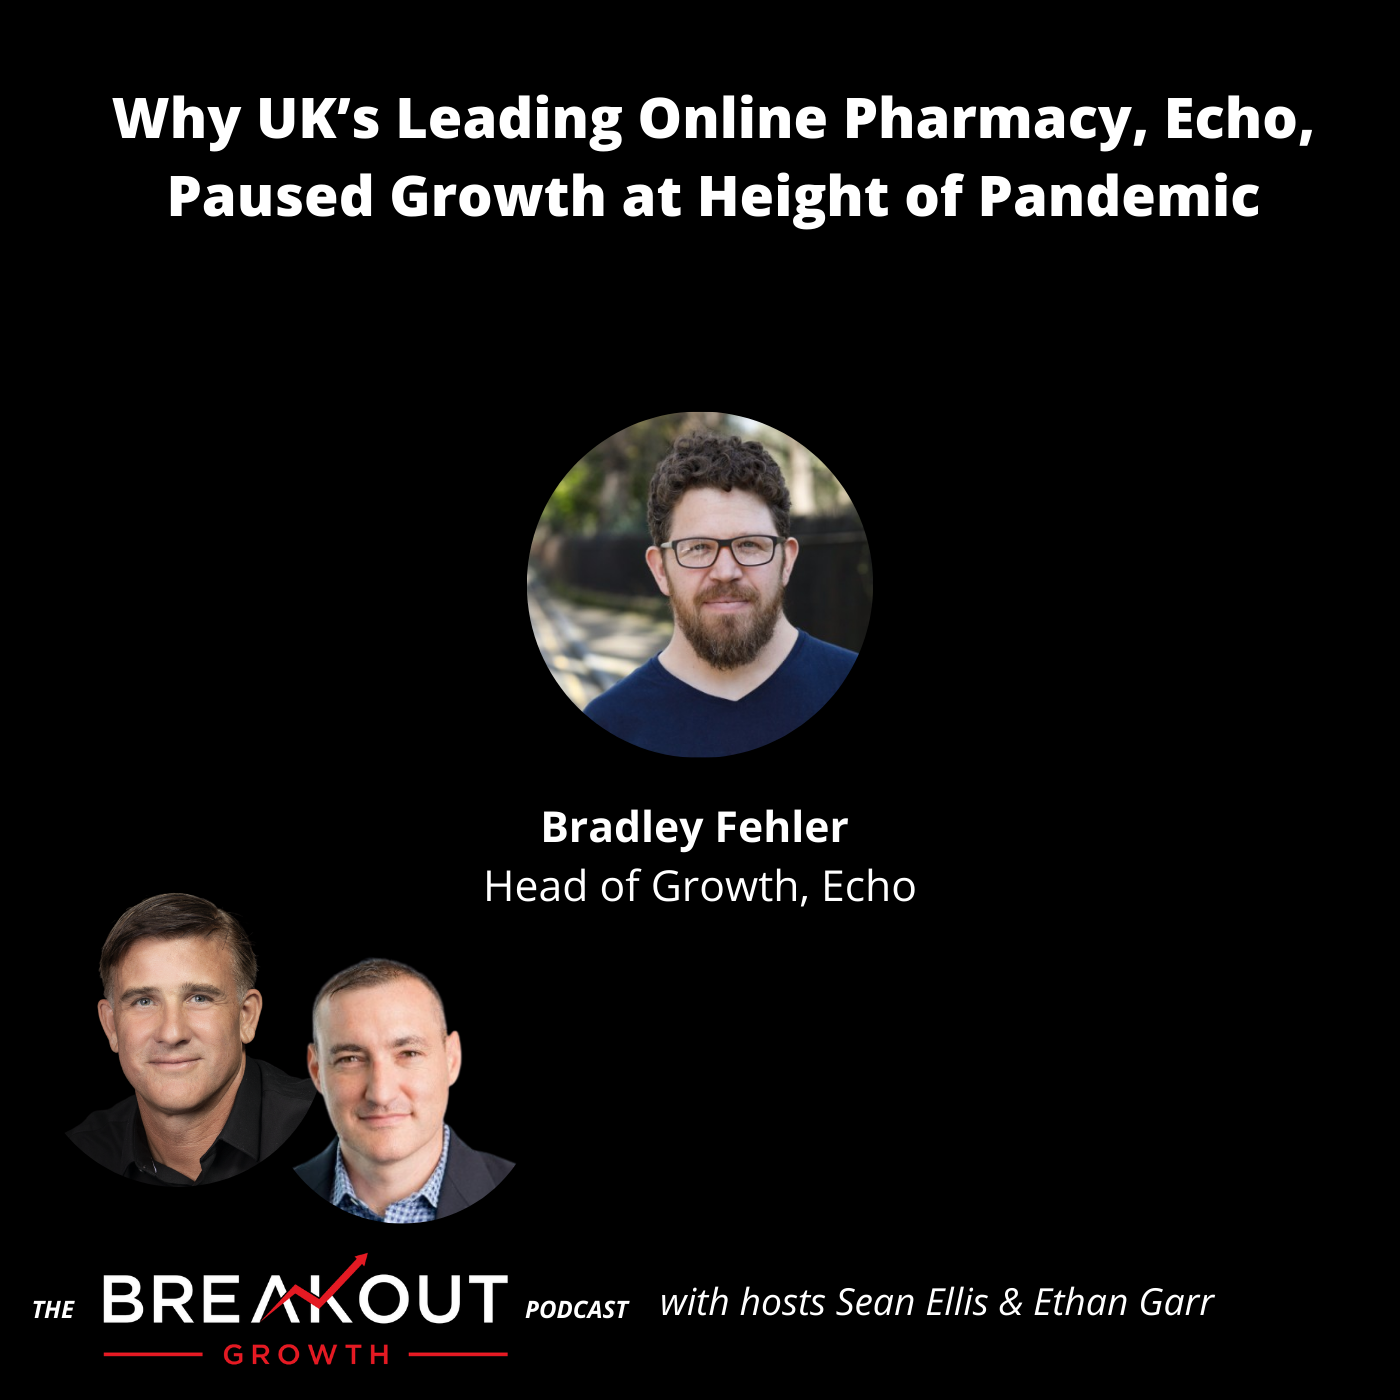 Why UK’s Leading Online Pharmacy, Echo, Paused Growth at Height of Pandemic